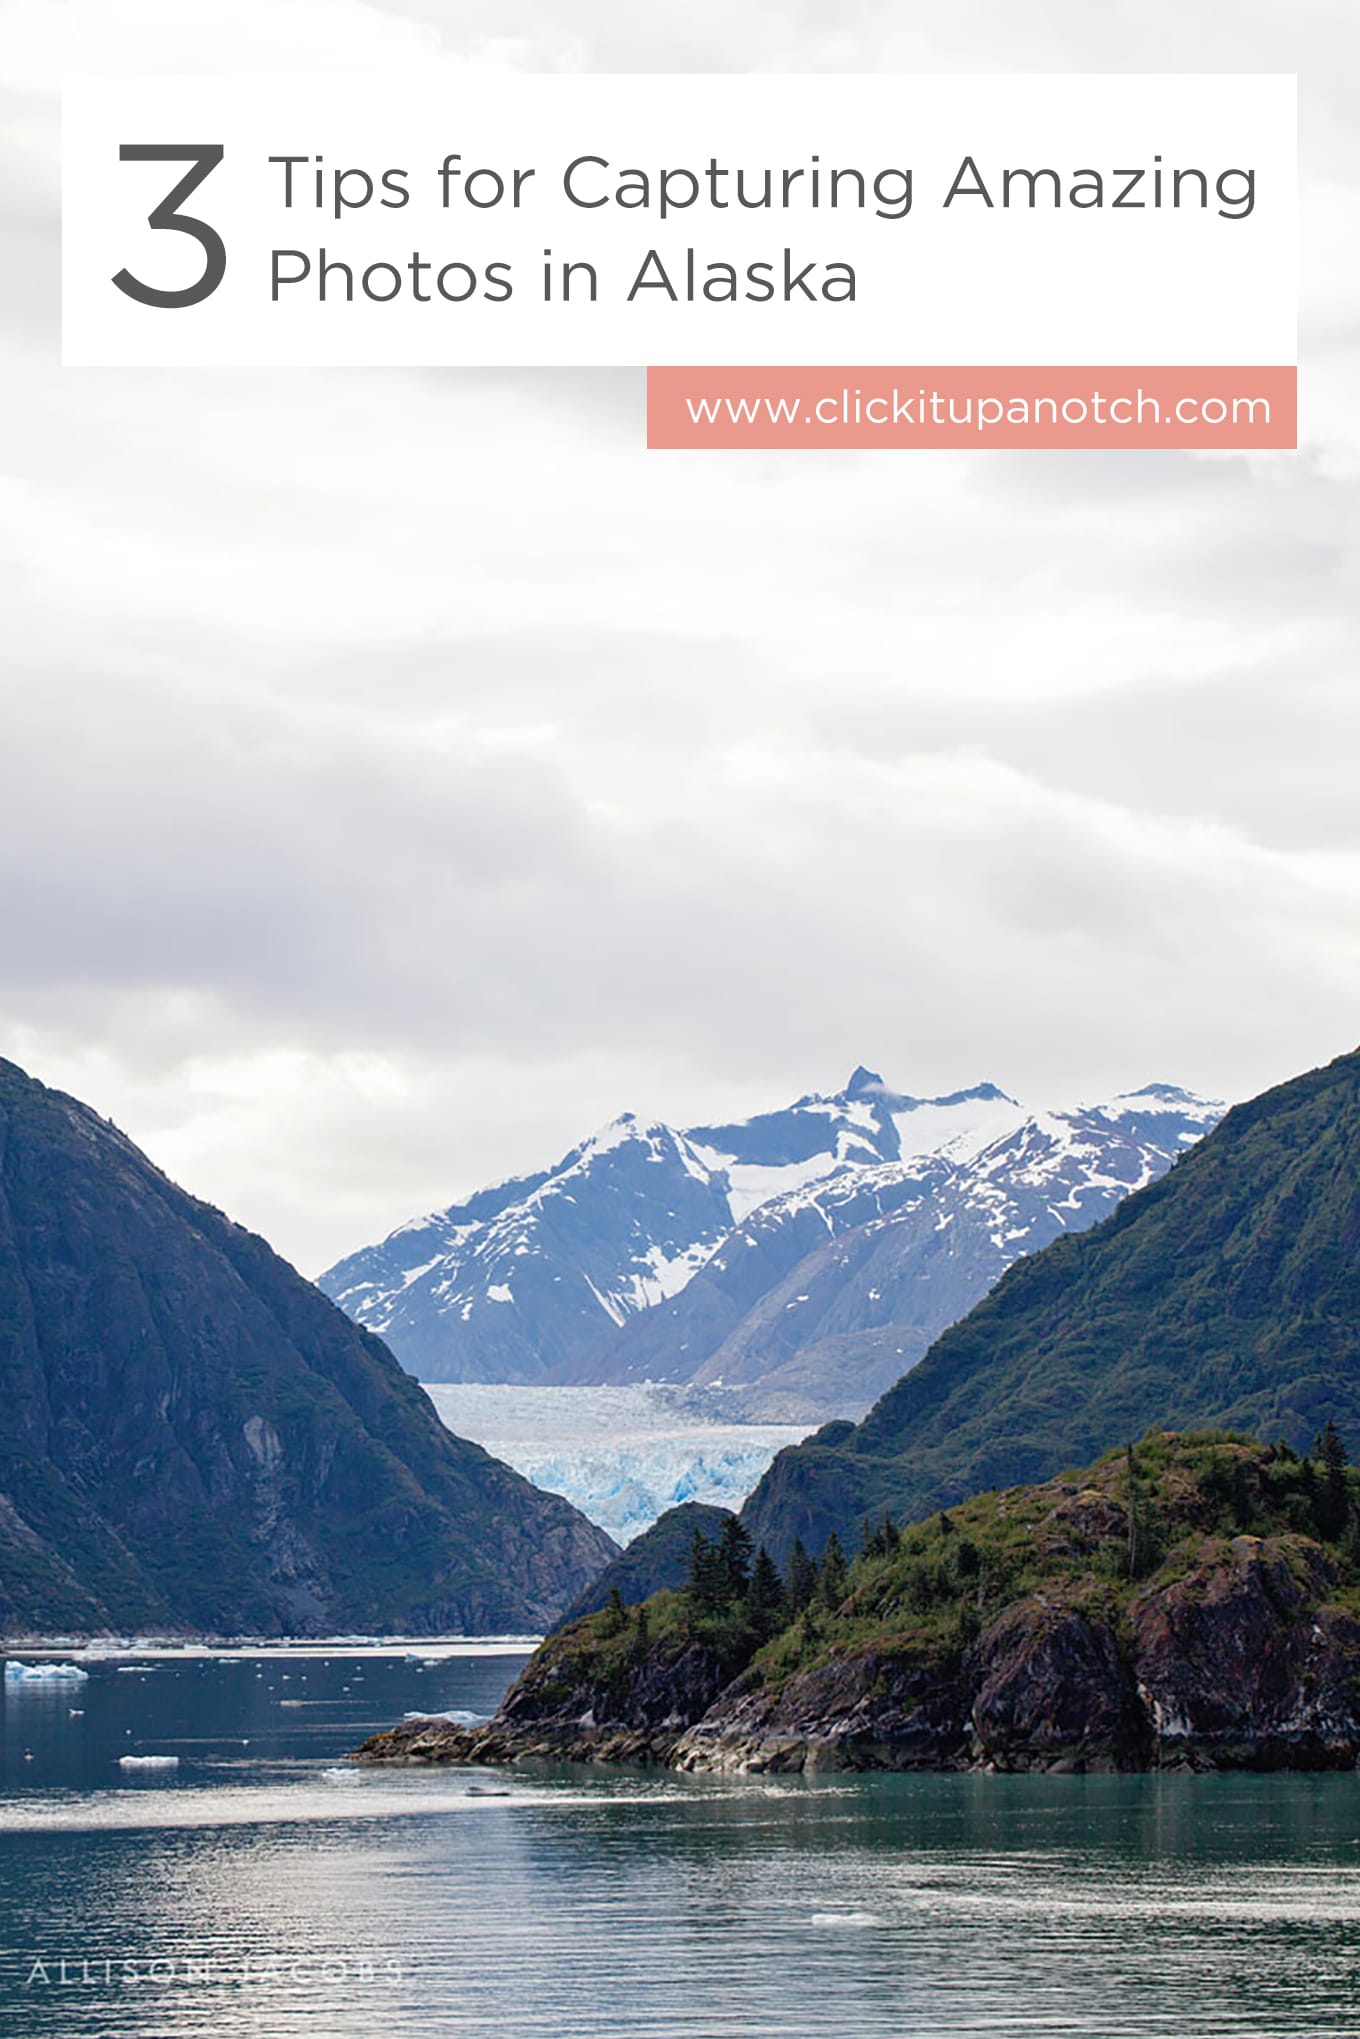 This is a great post if you're planning on capturing Alaska from a cruise ship. Read - "3 Tips for Capturing Amazing Photos in Alaska"